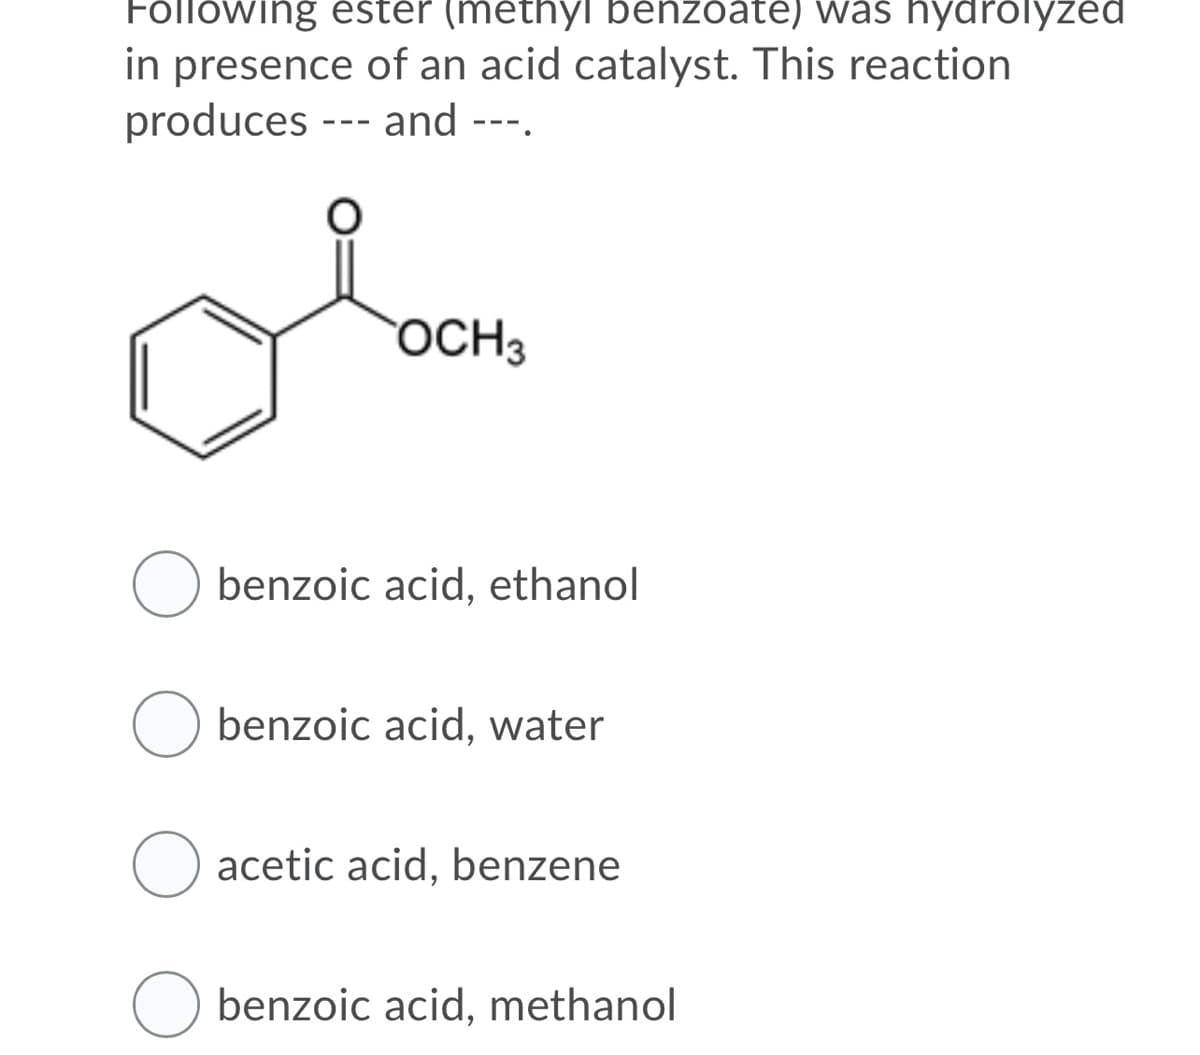 Following ester (methyl benzoate) was hydrolyzed
in presence of an acid catalyst. This reaction
produces --- and ---.
OCH3
benzoic acid, ethanol
benzoic acid, water
acetic acid, benzene
benzoic acid, methanol
